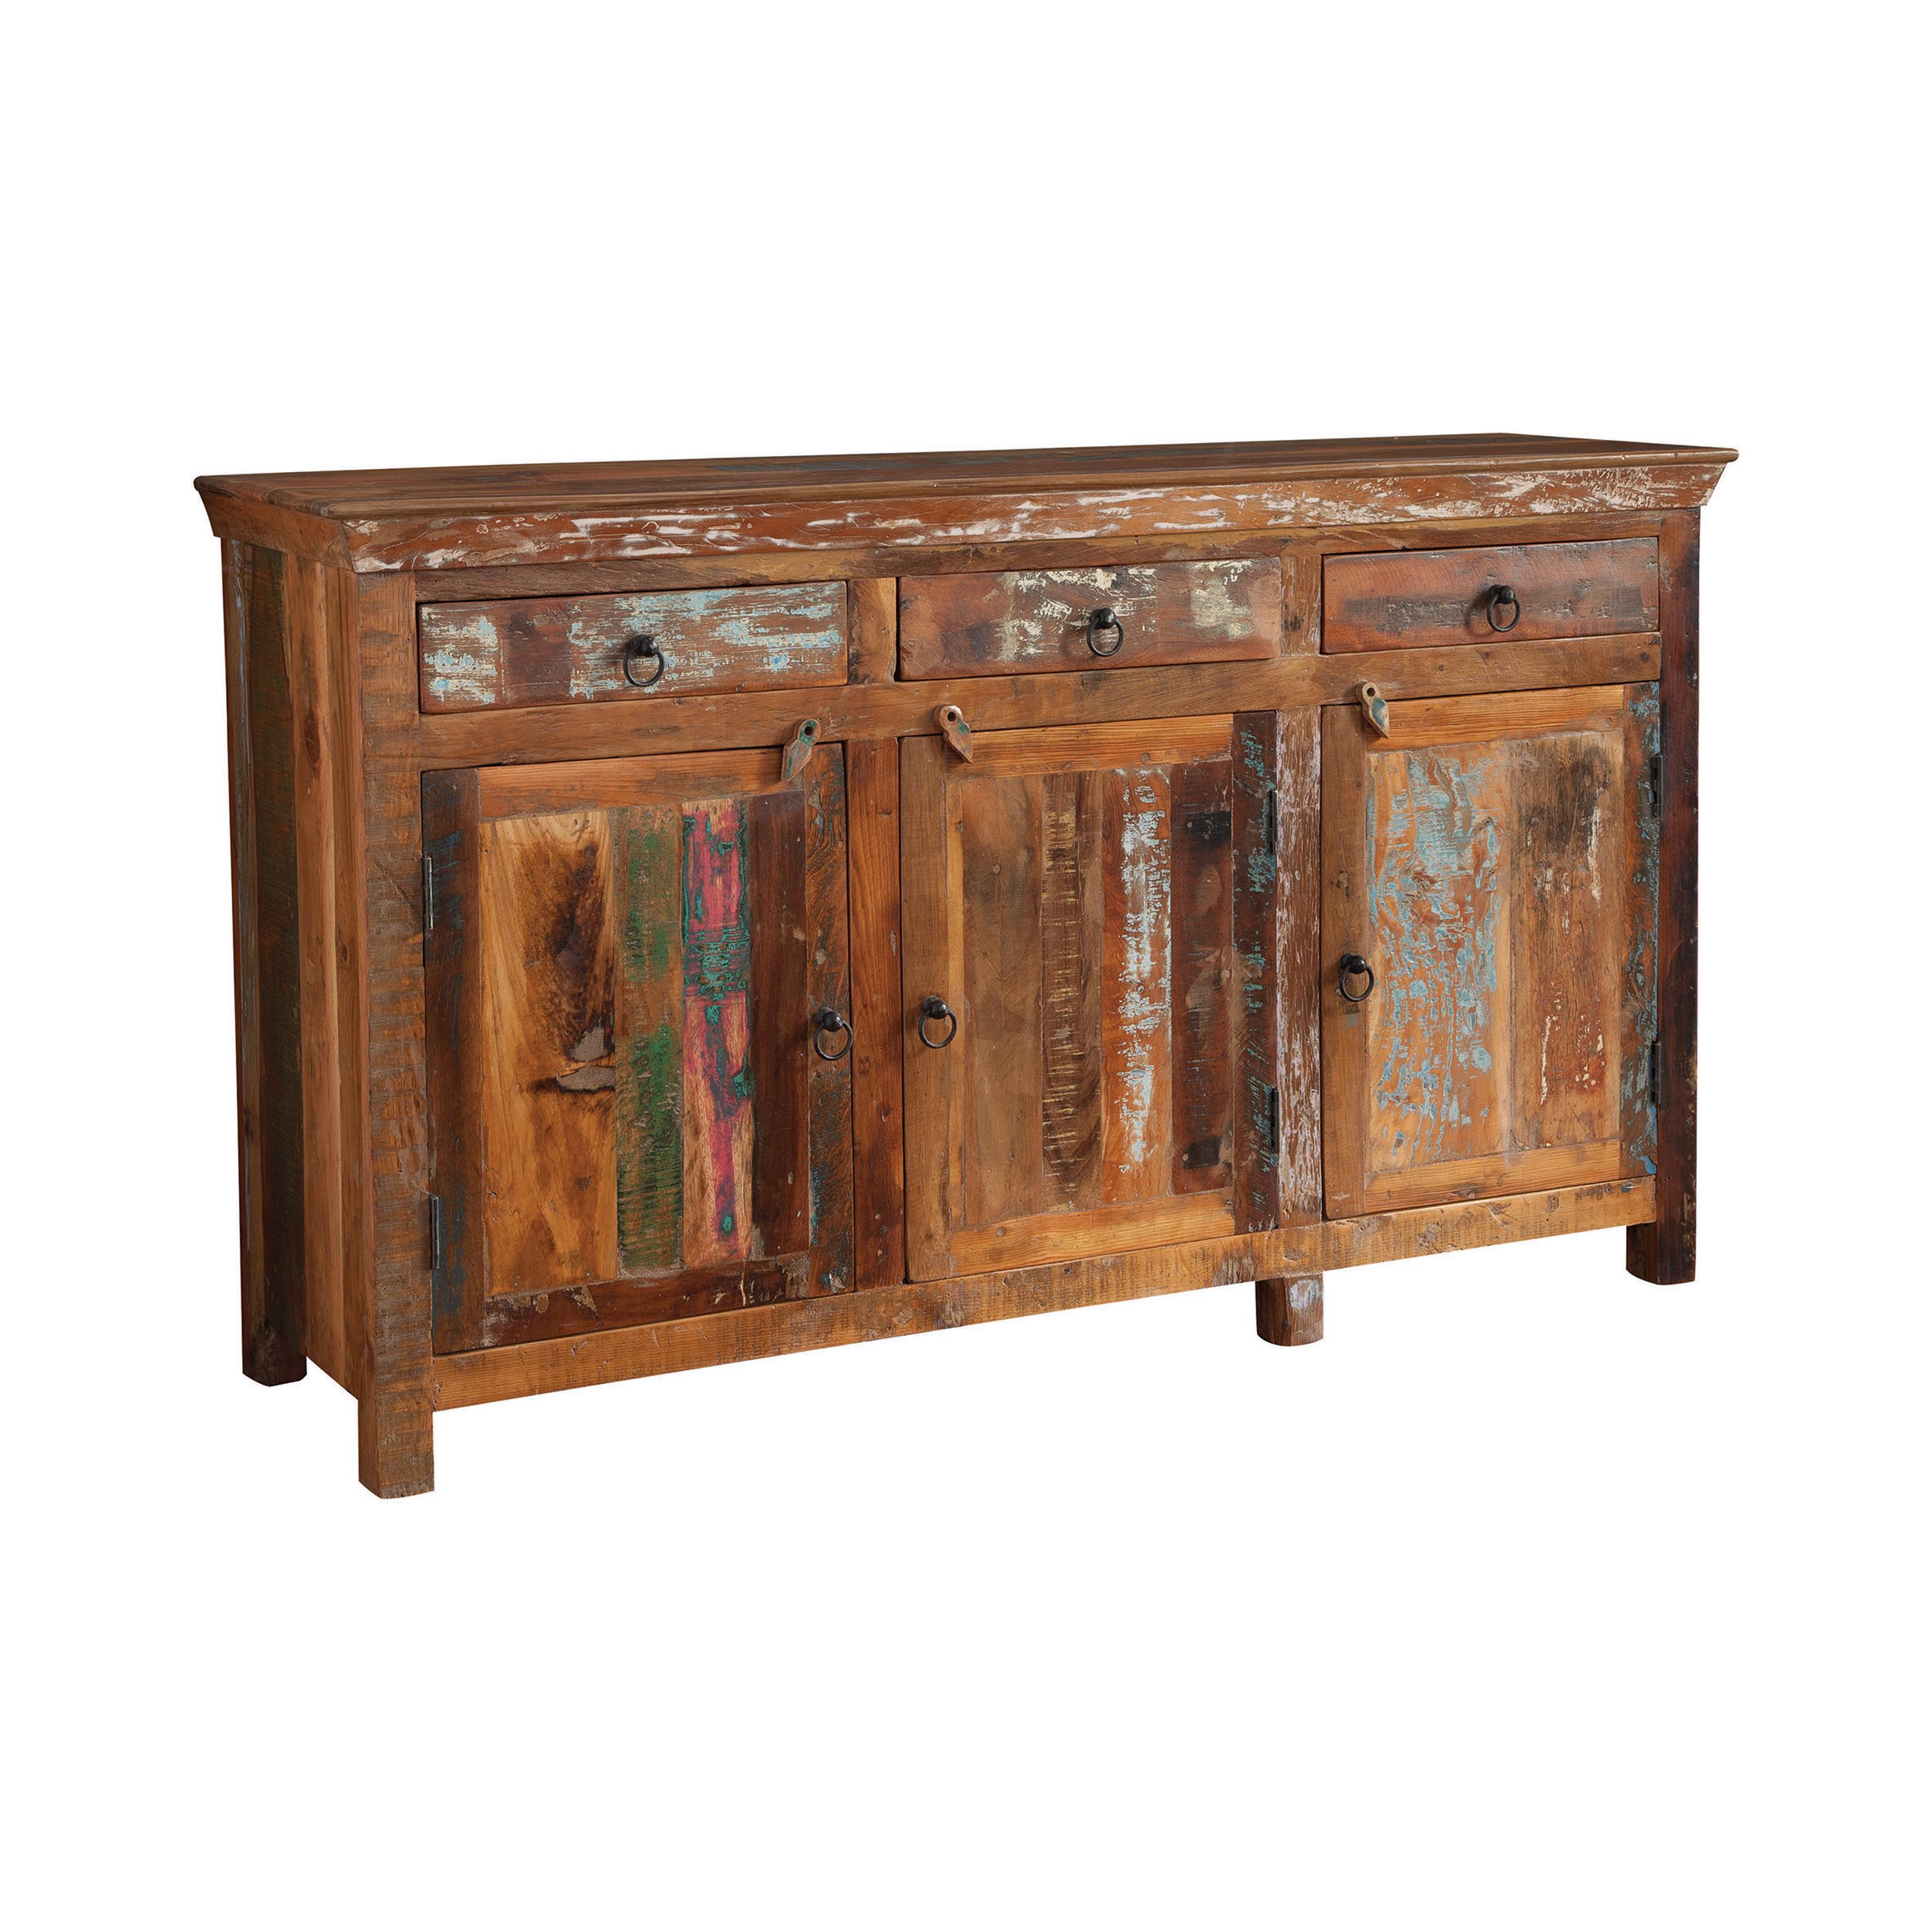 Rustic Accent Cabinet 950367 950367 in Wood 